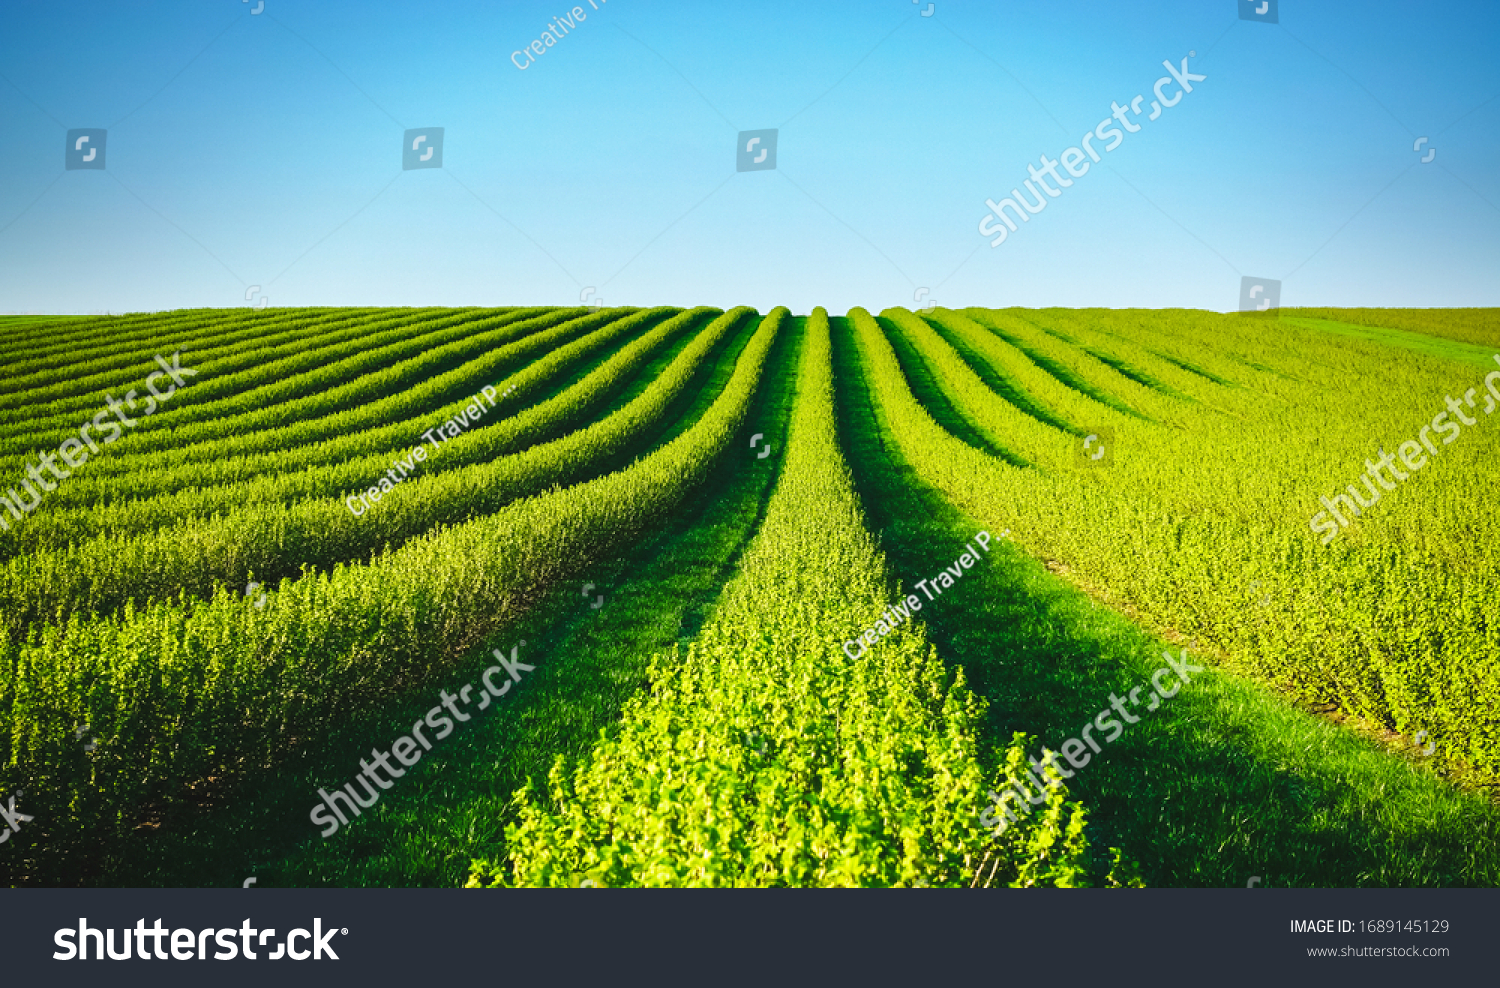 Row of blackcurrant bushes on a summer farm in sunny day. Location place of Ukraine, Europe. Photo of creativity concept. Scenic image of agrarian land in springtime. Discover the beauty of earth. #1689145129